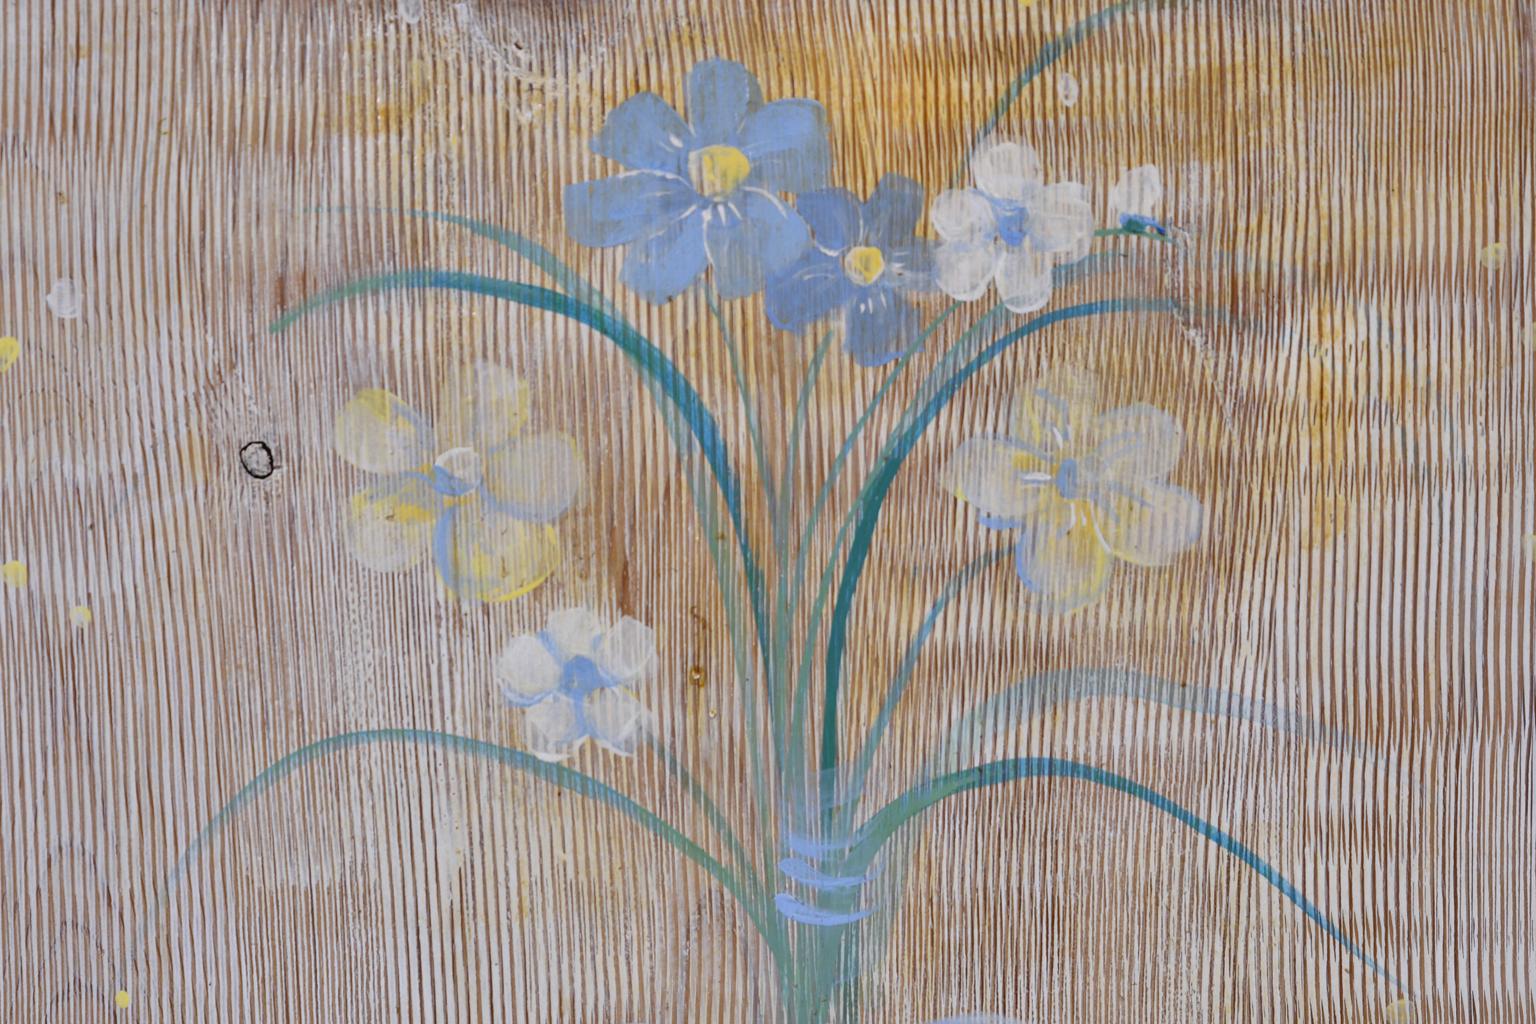 Child's Bed with Blue & Yellow Flowers over White Background, Europe, circa 1920 3